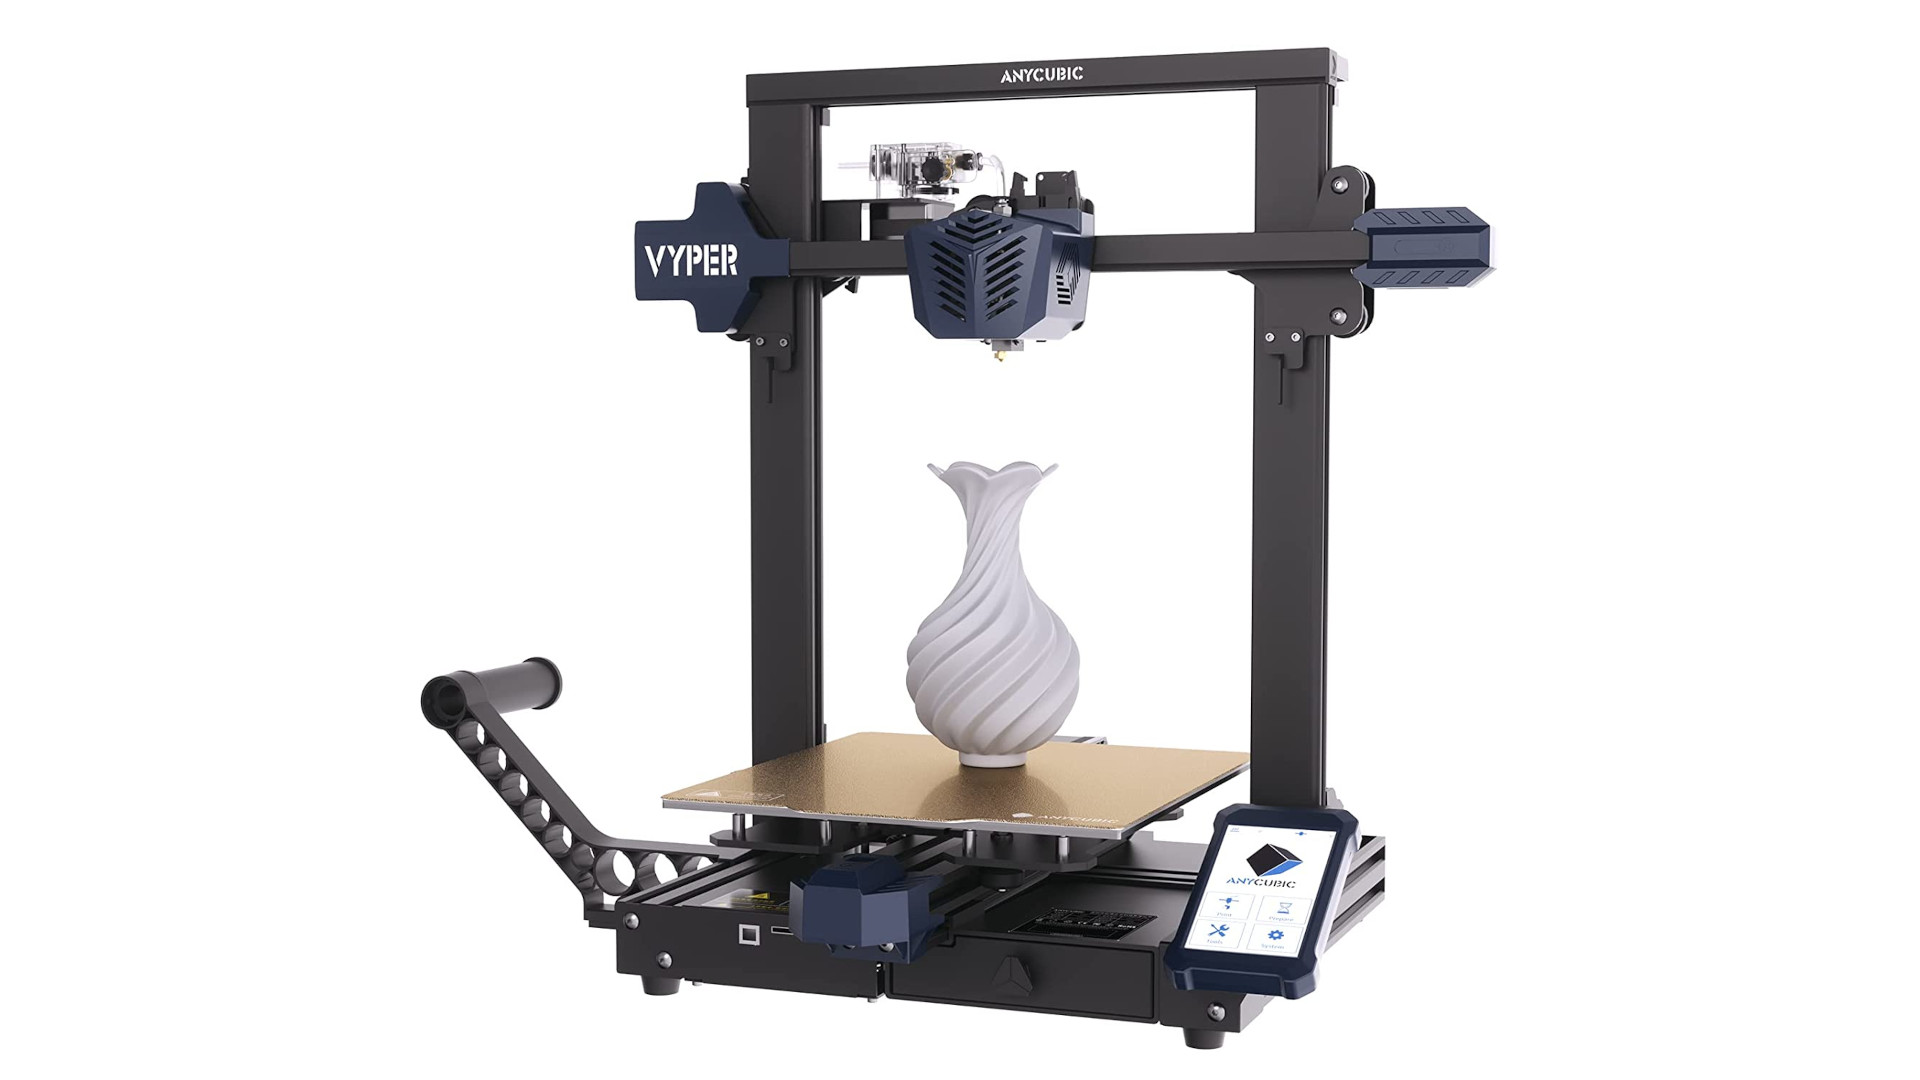 The Anycubic Vyper 3D printer against a white background